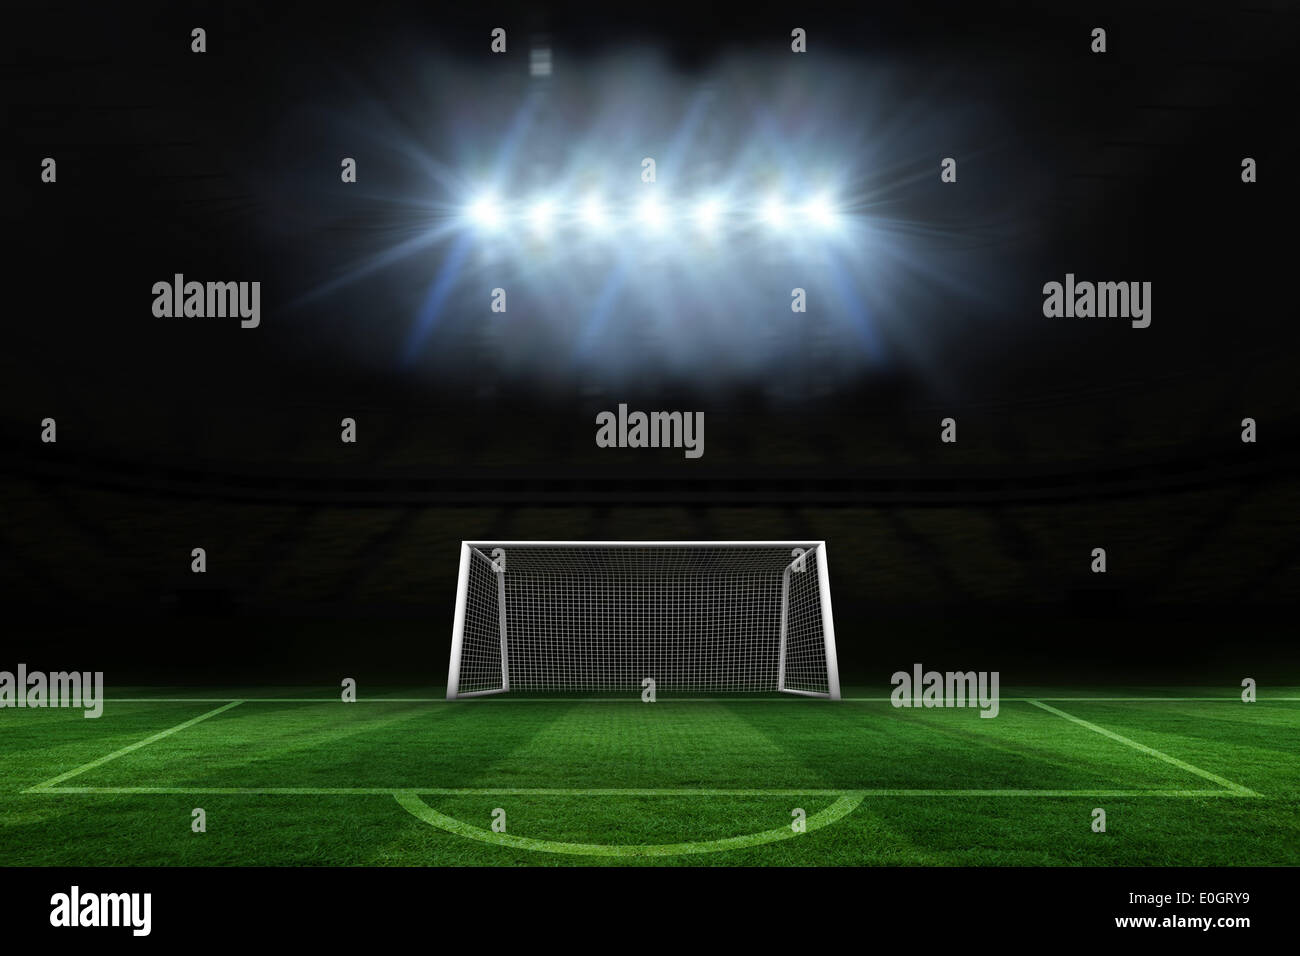 Football pitch and goal under spotlights Stock Photo